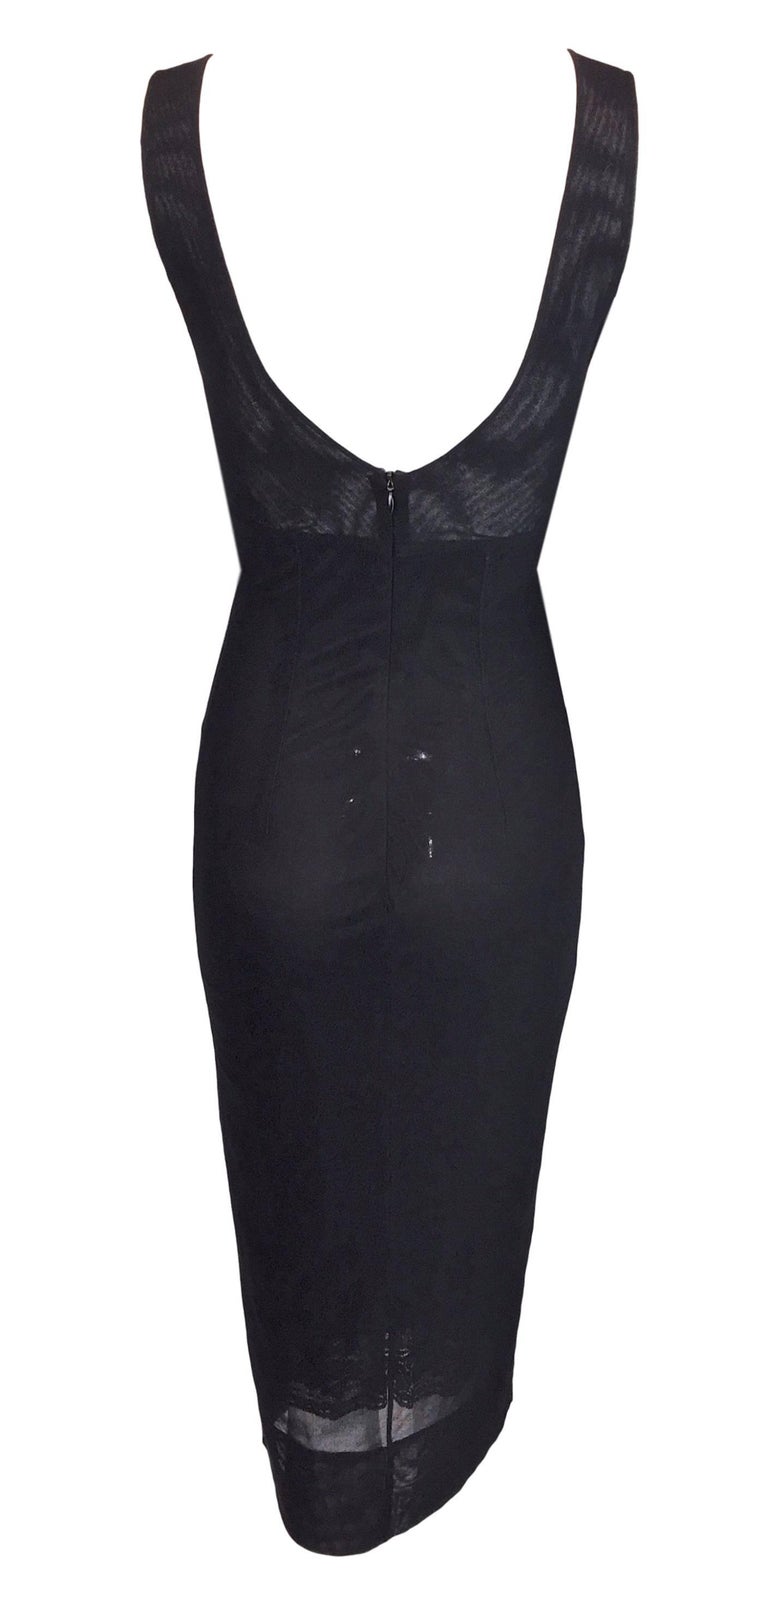 S/S 1998 Dolce and Gabbana Black Sheer Mesh Pencil Wiggle Dress Lace ...